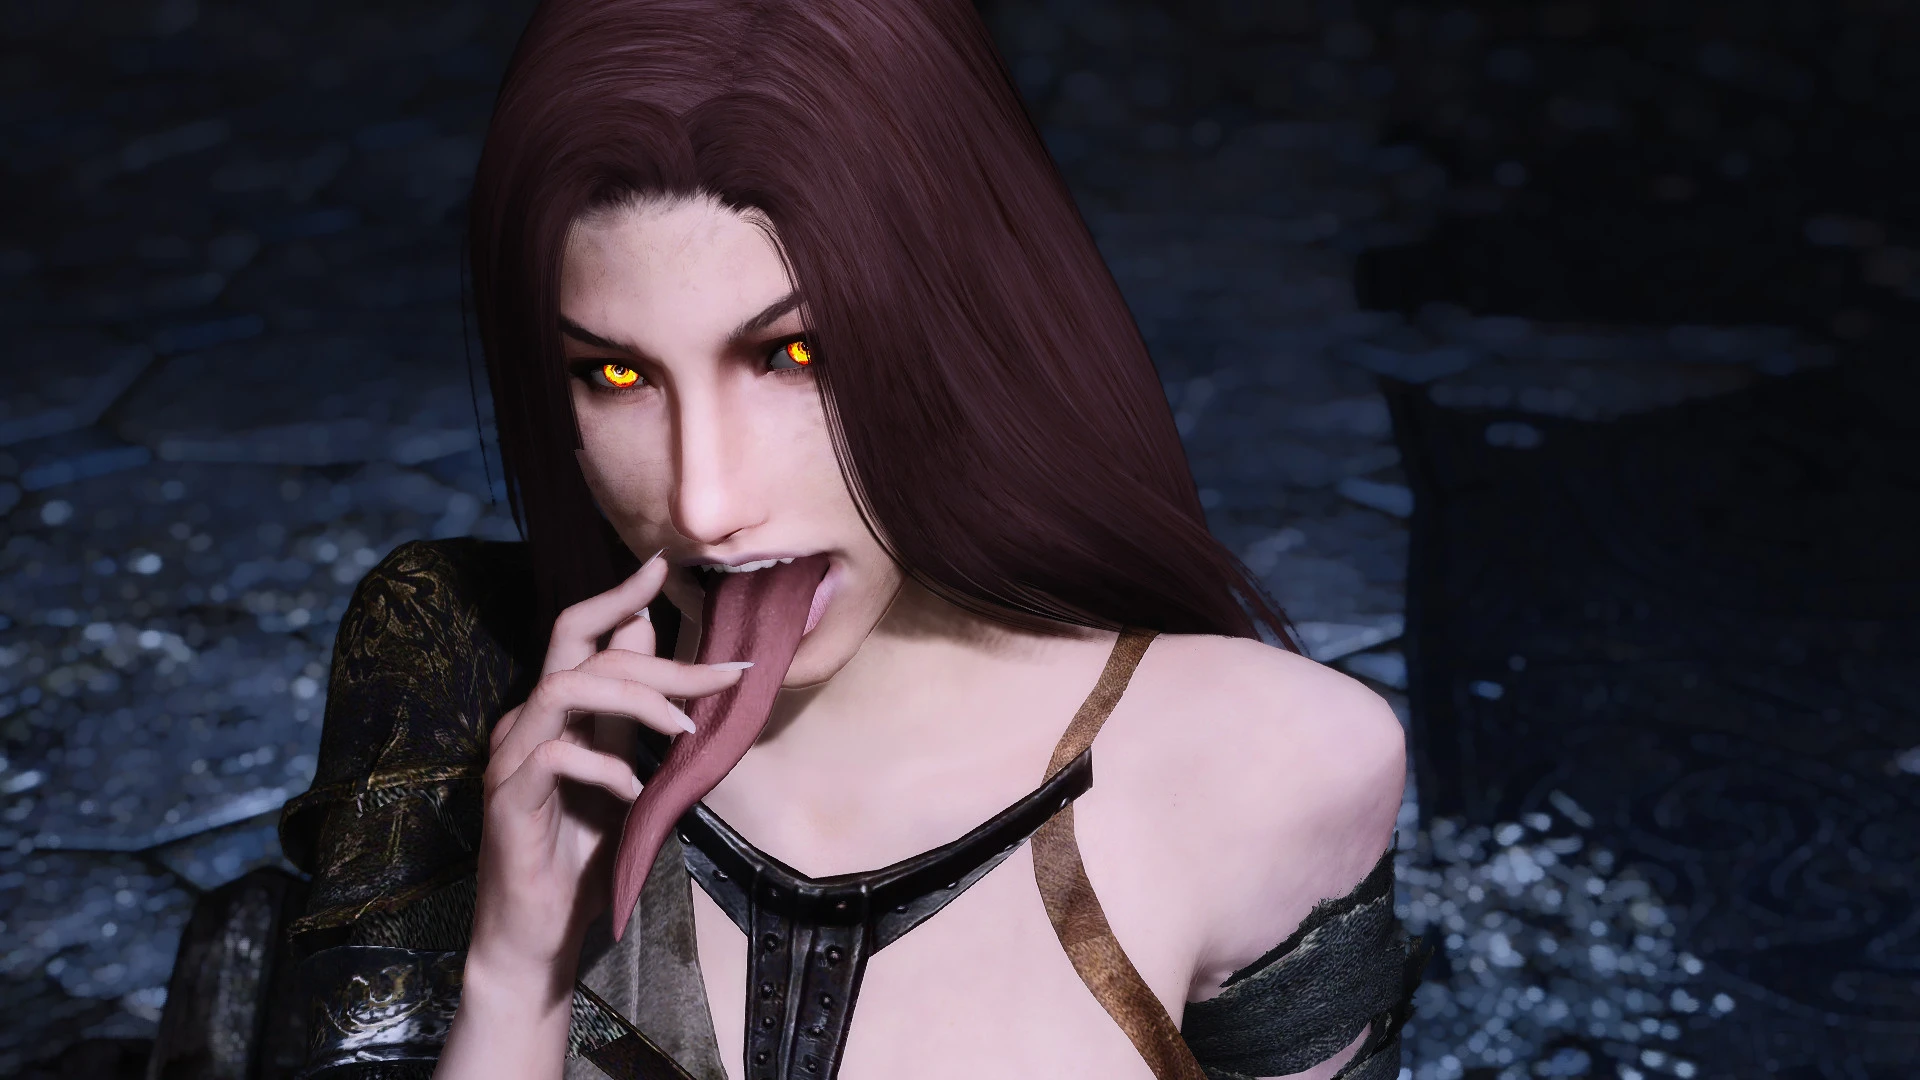 [search] Tongue Mod Request And Find Skyrim Adult And Sex Mods Loverslab